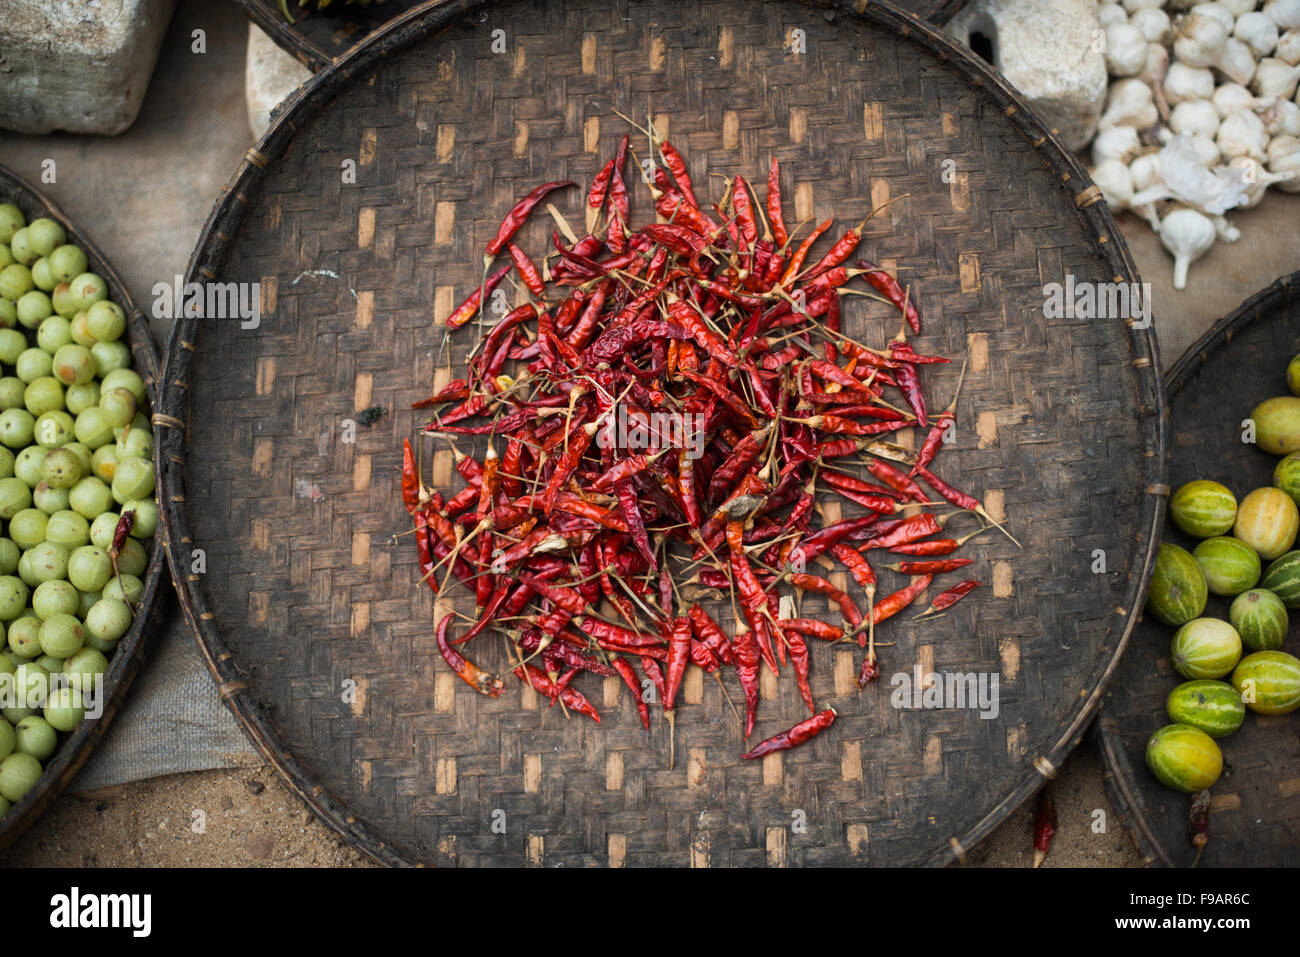 BAGAN, MYANMAR - Dried red chili peppers on a bamboo platter on displace at the morning market at Myinkaba Village. Myinkaba Village, a small local village that lies between Old Bagan and New Bagan in Myanmar. Stock Photo